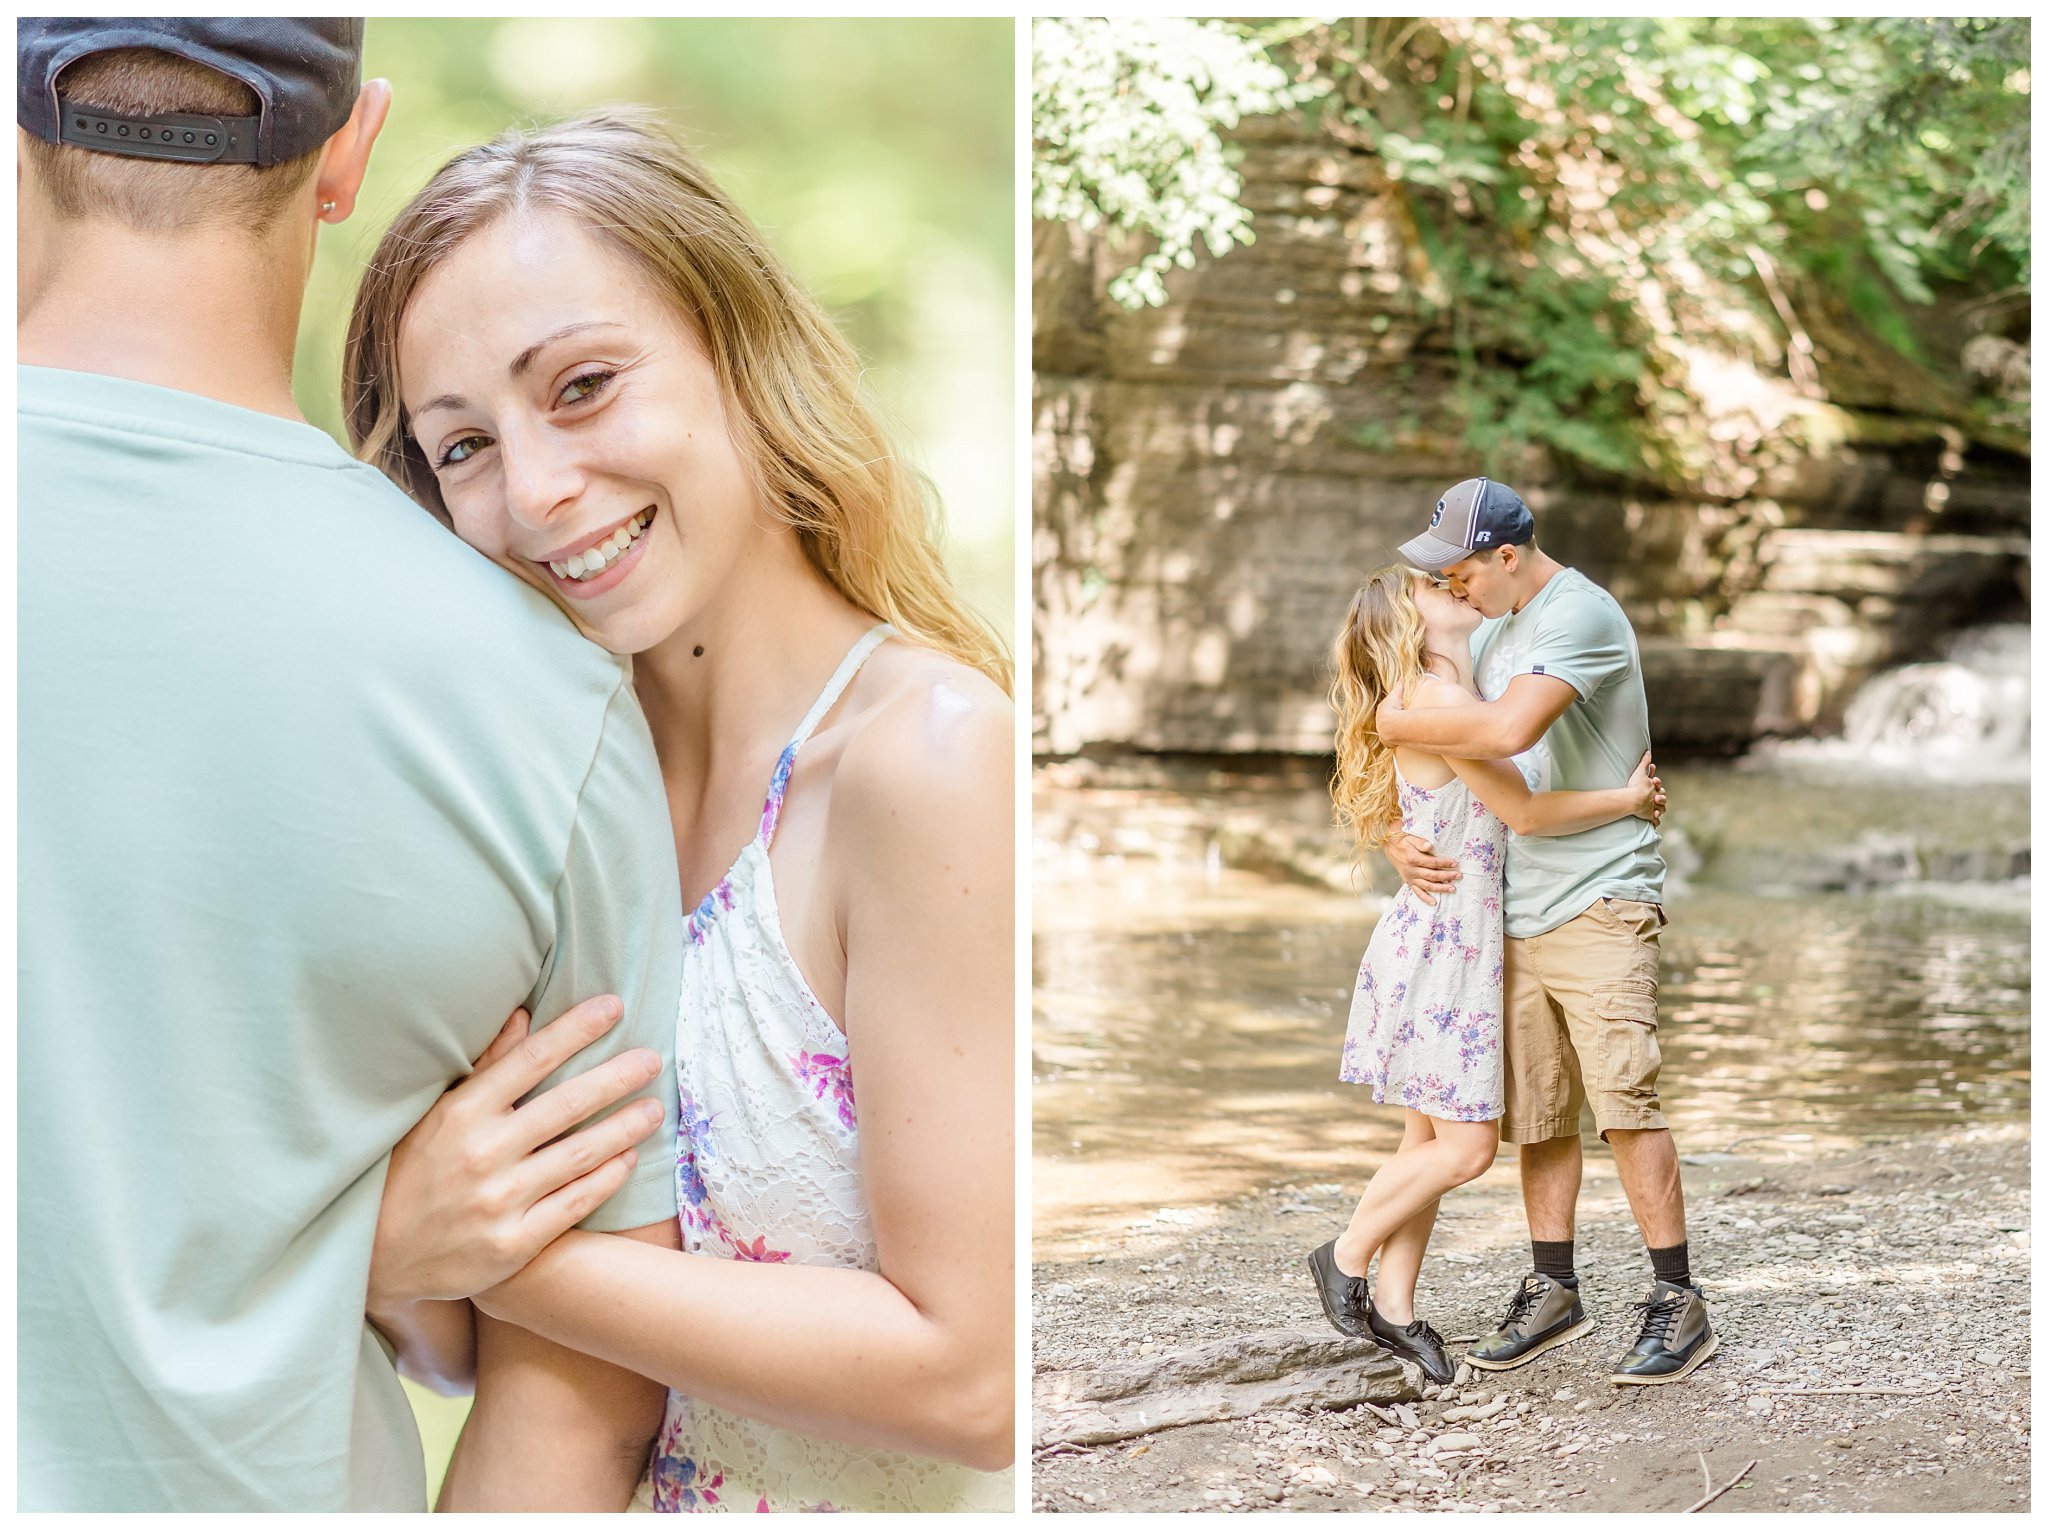 Joanna Young Photography Elizabeth and Cody Engagement Session_0003.jpg